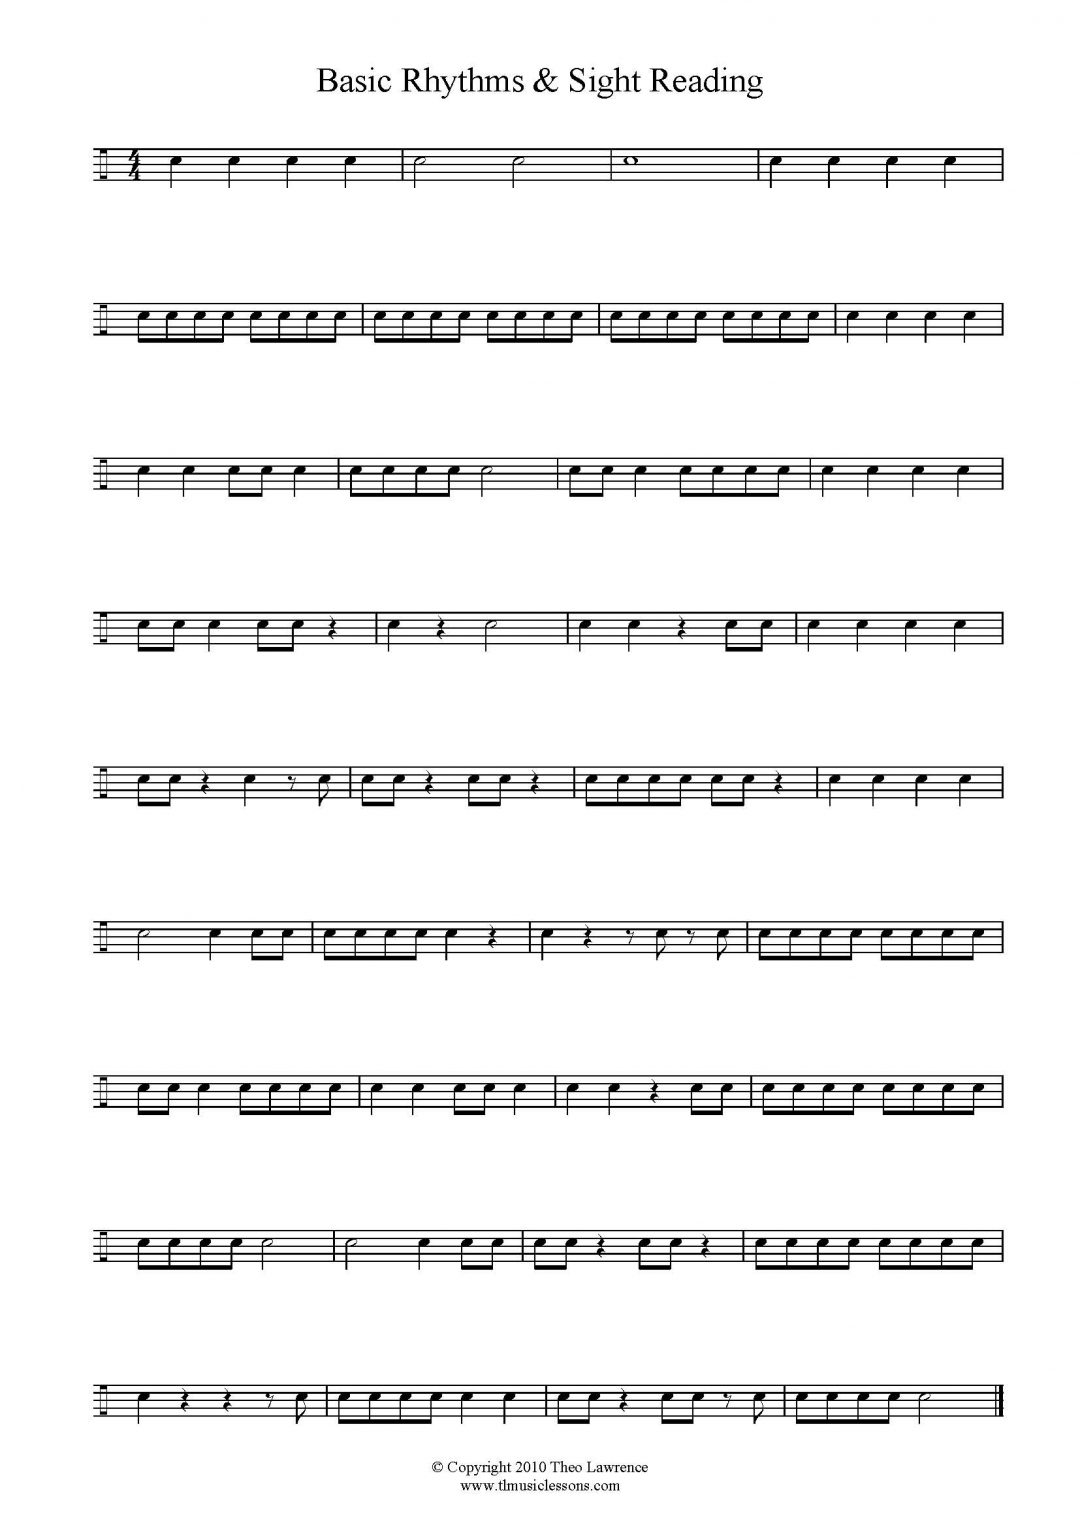 Drum Sheet Music: How To Read & Write It (Including Drum Key) for Dummies